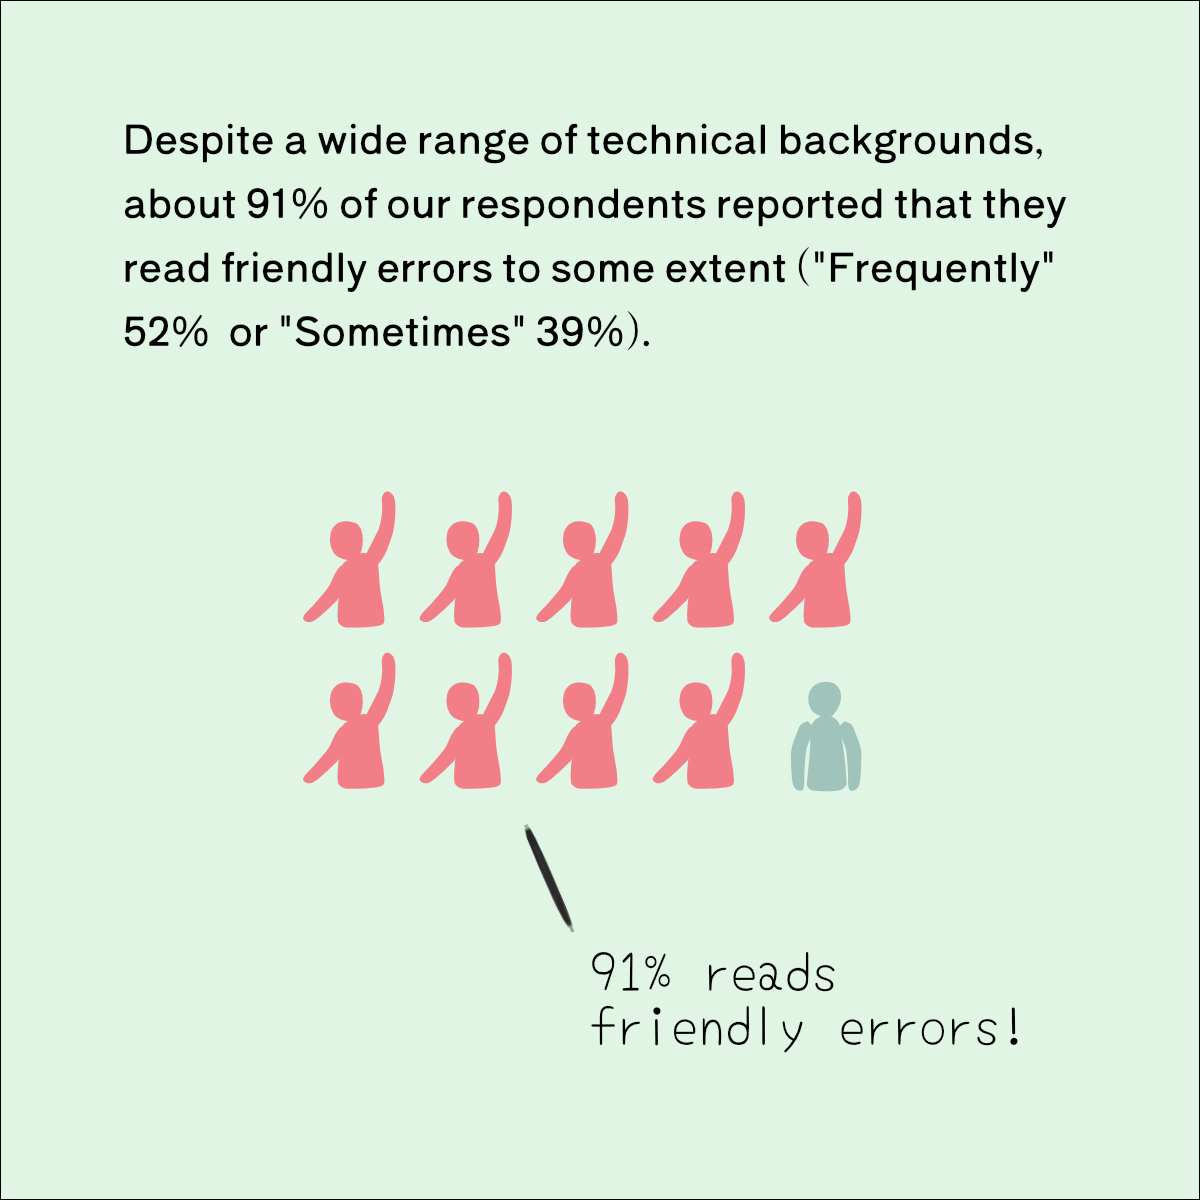 Despite a wide range of technical backgrounds, about 91% of our respondents reported that they read friendly errors to some extent ("Frequently" 52% or "Sometimes" 39%).